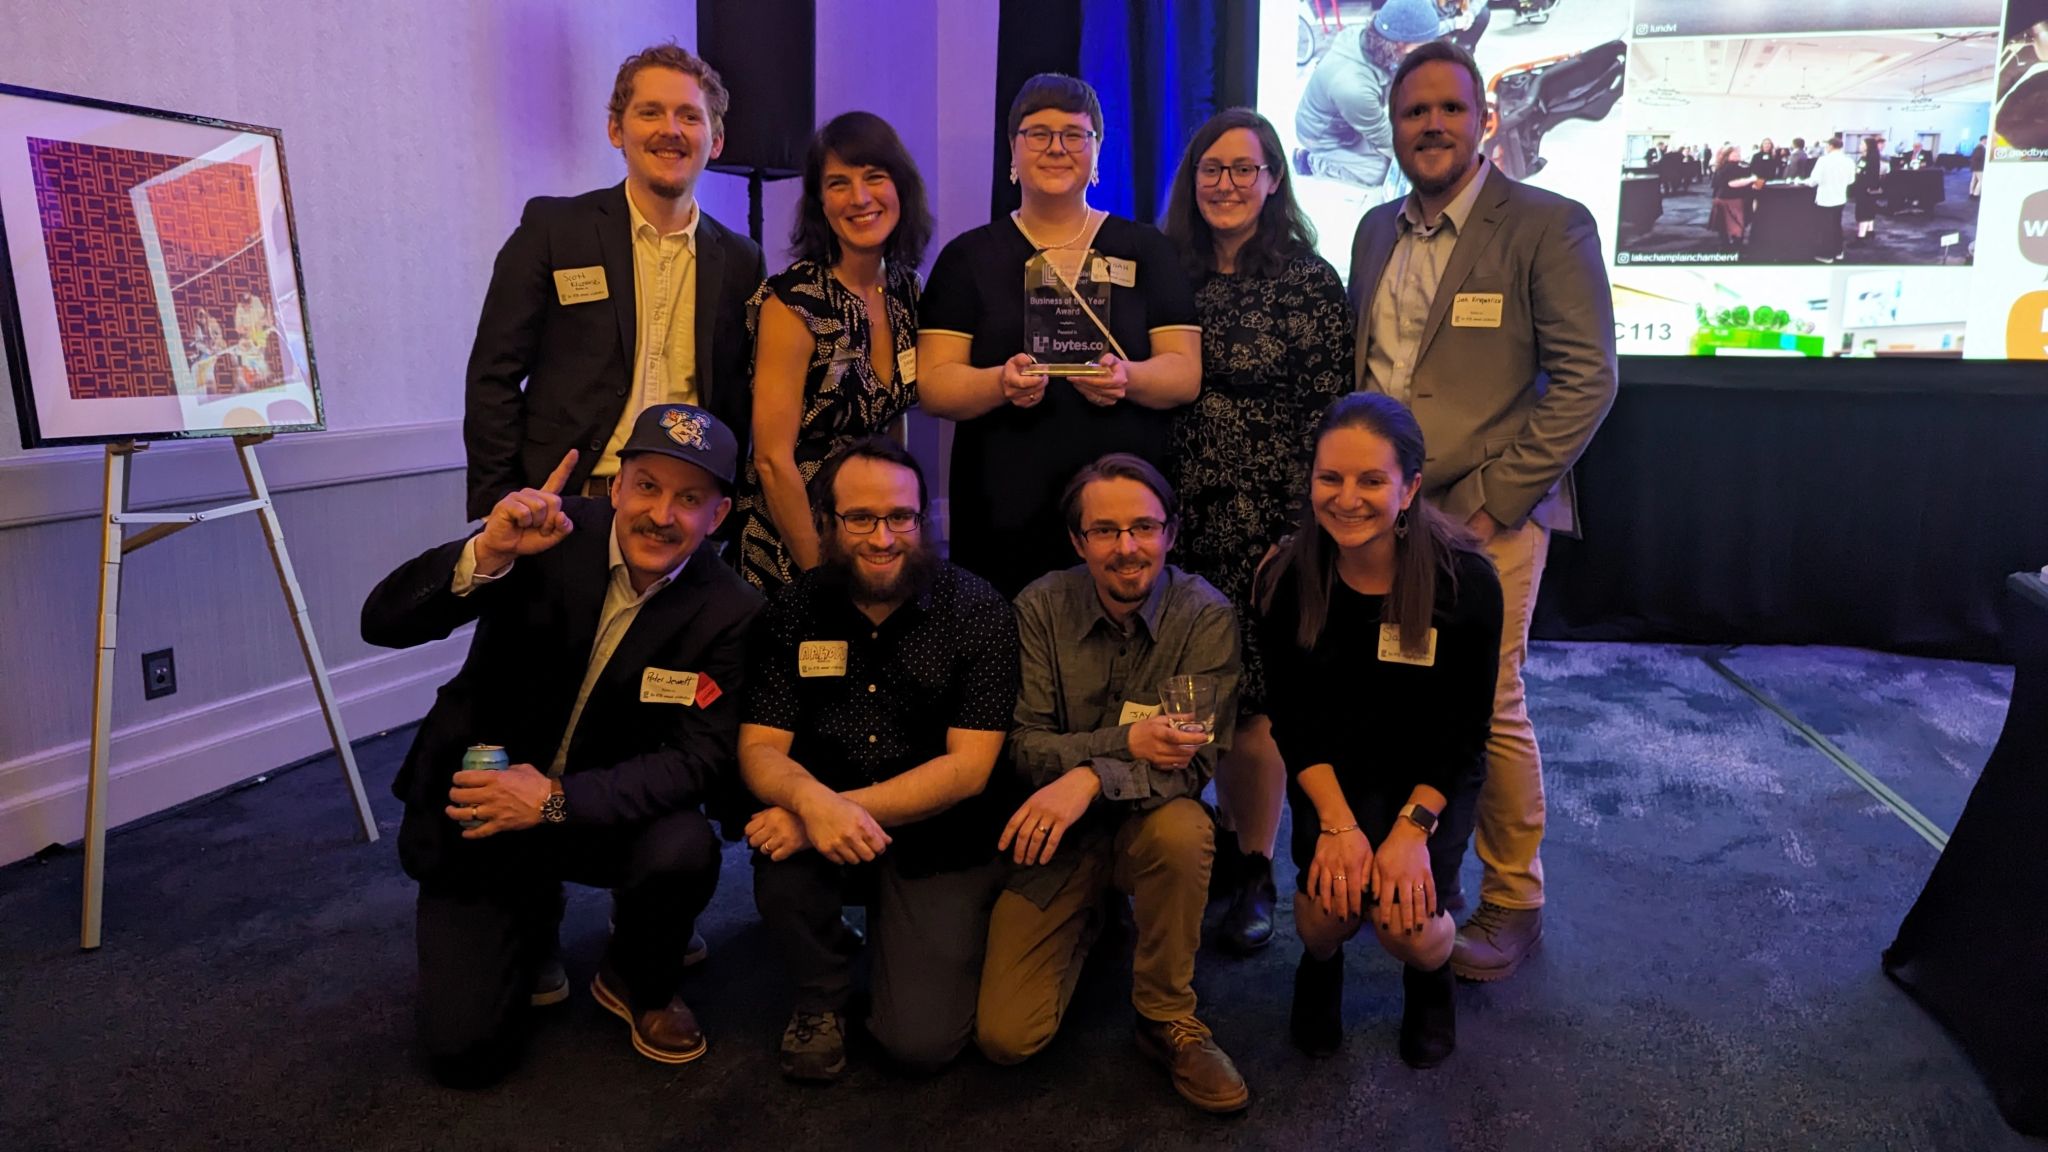 The Bytes.co team standing and kneeling together for a group photo after accepting the Lake Champlain Chamber 2024 Business of the Year award. From left to right: Scott Kliczewski, Kristina Drobny, Hannah Hook, Lilly Romano, Josh Kirkpatrick, Peter Jewett, Aaron Silber, Jay Di Vece, and Sarah Maines.